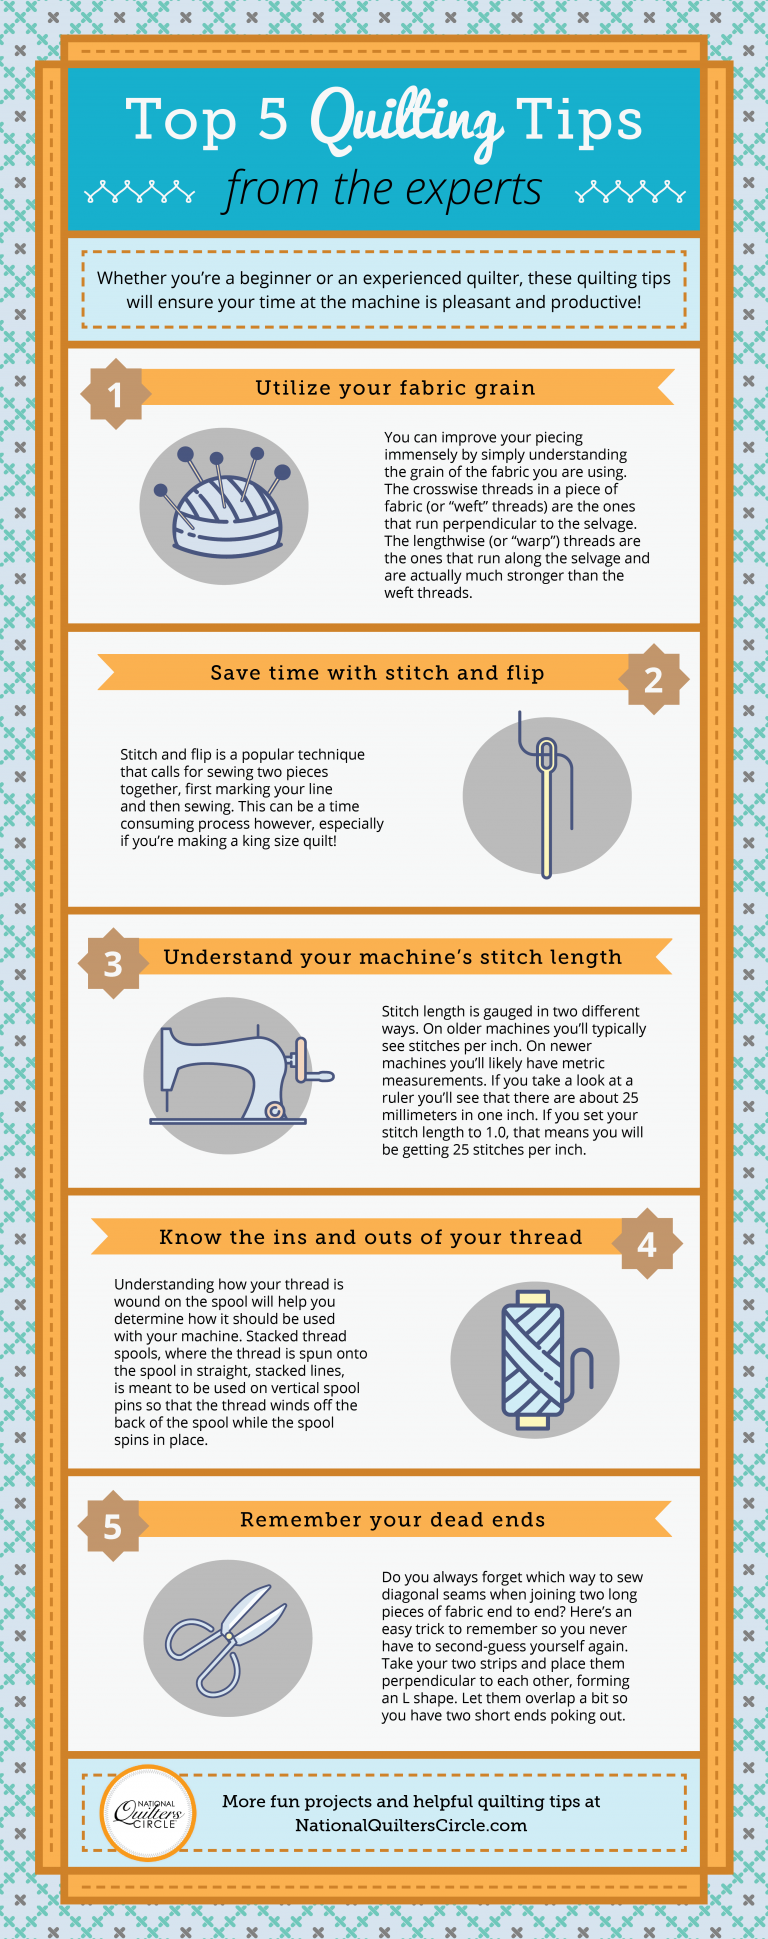 Top 5 Quilting Tips